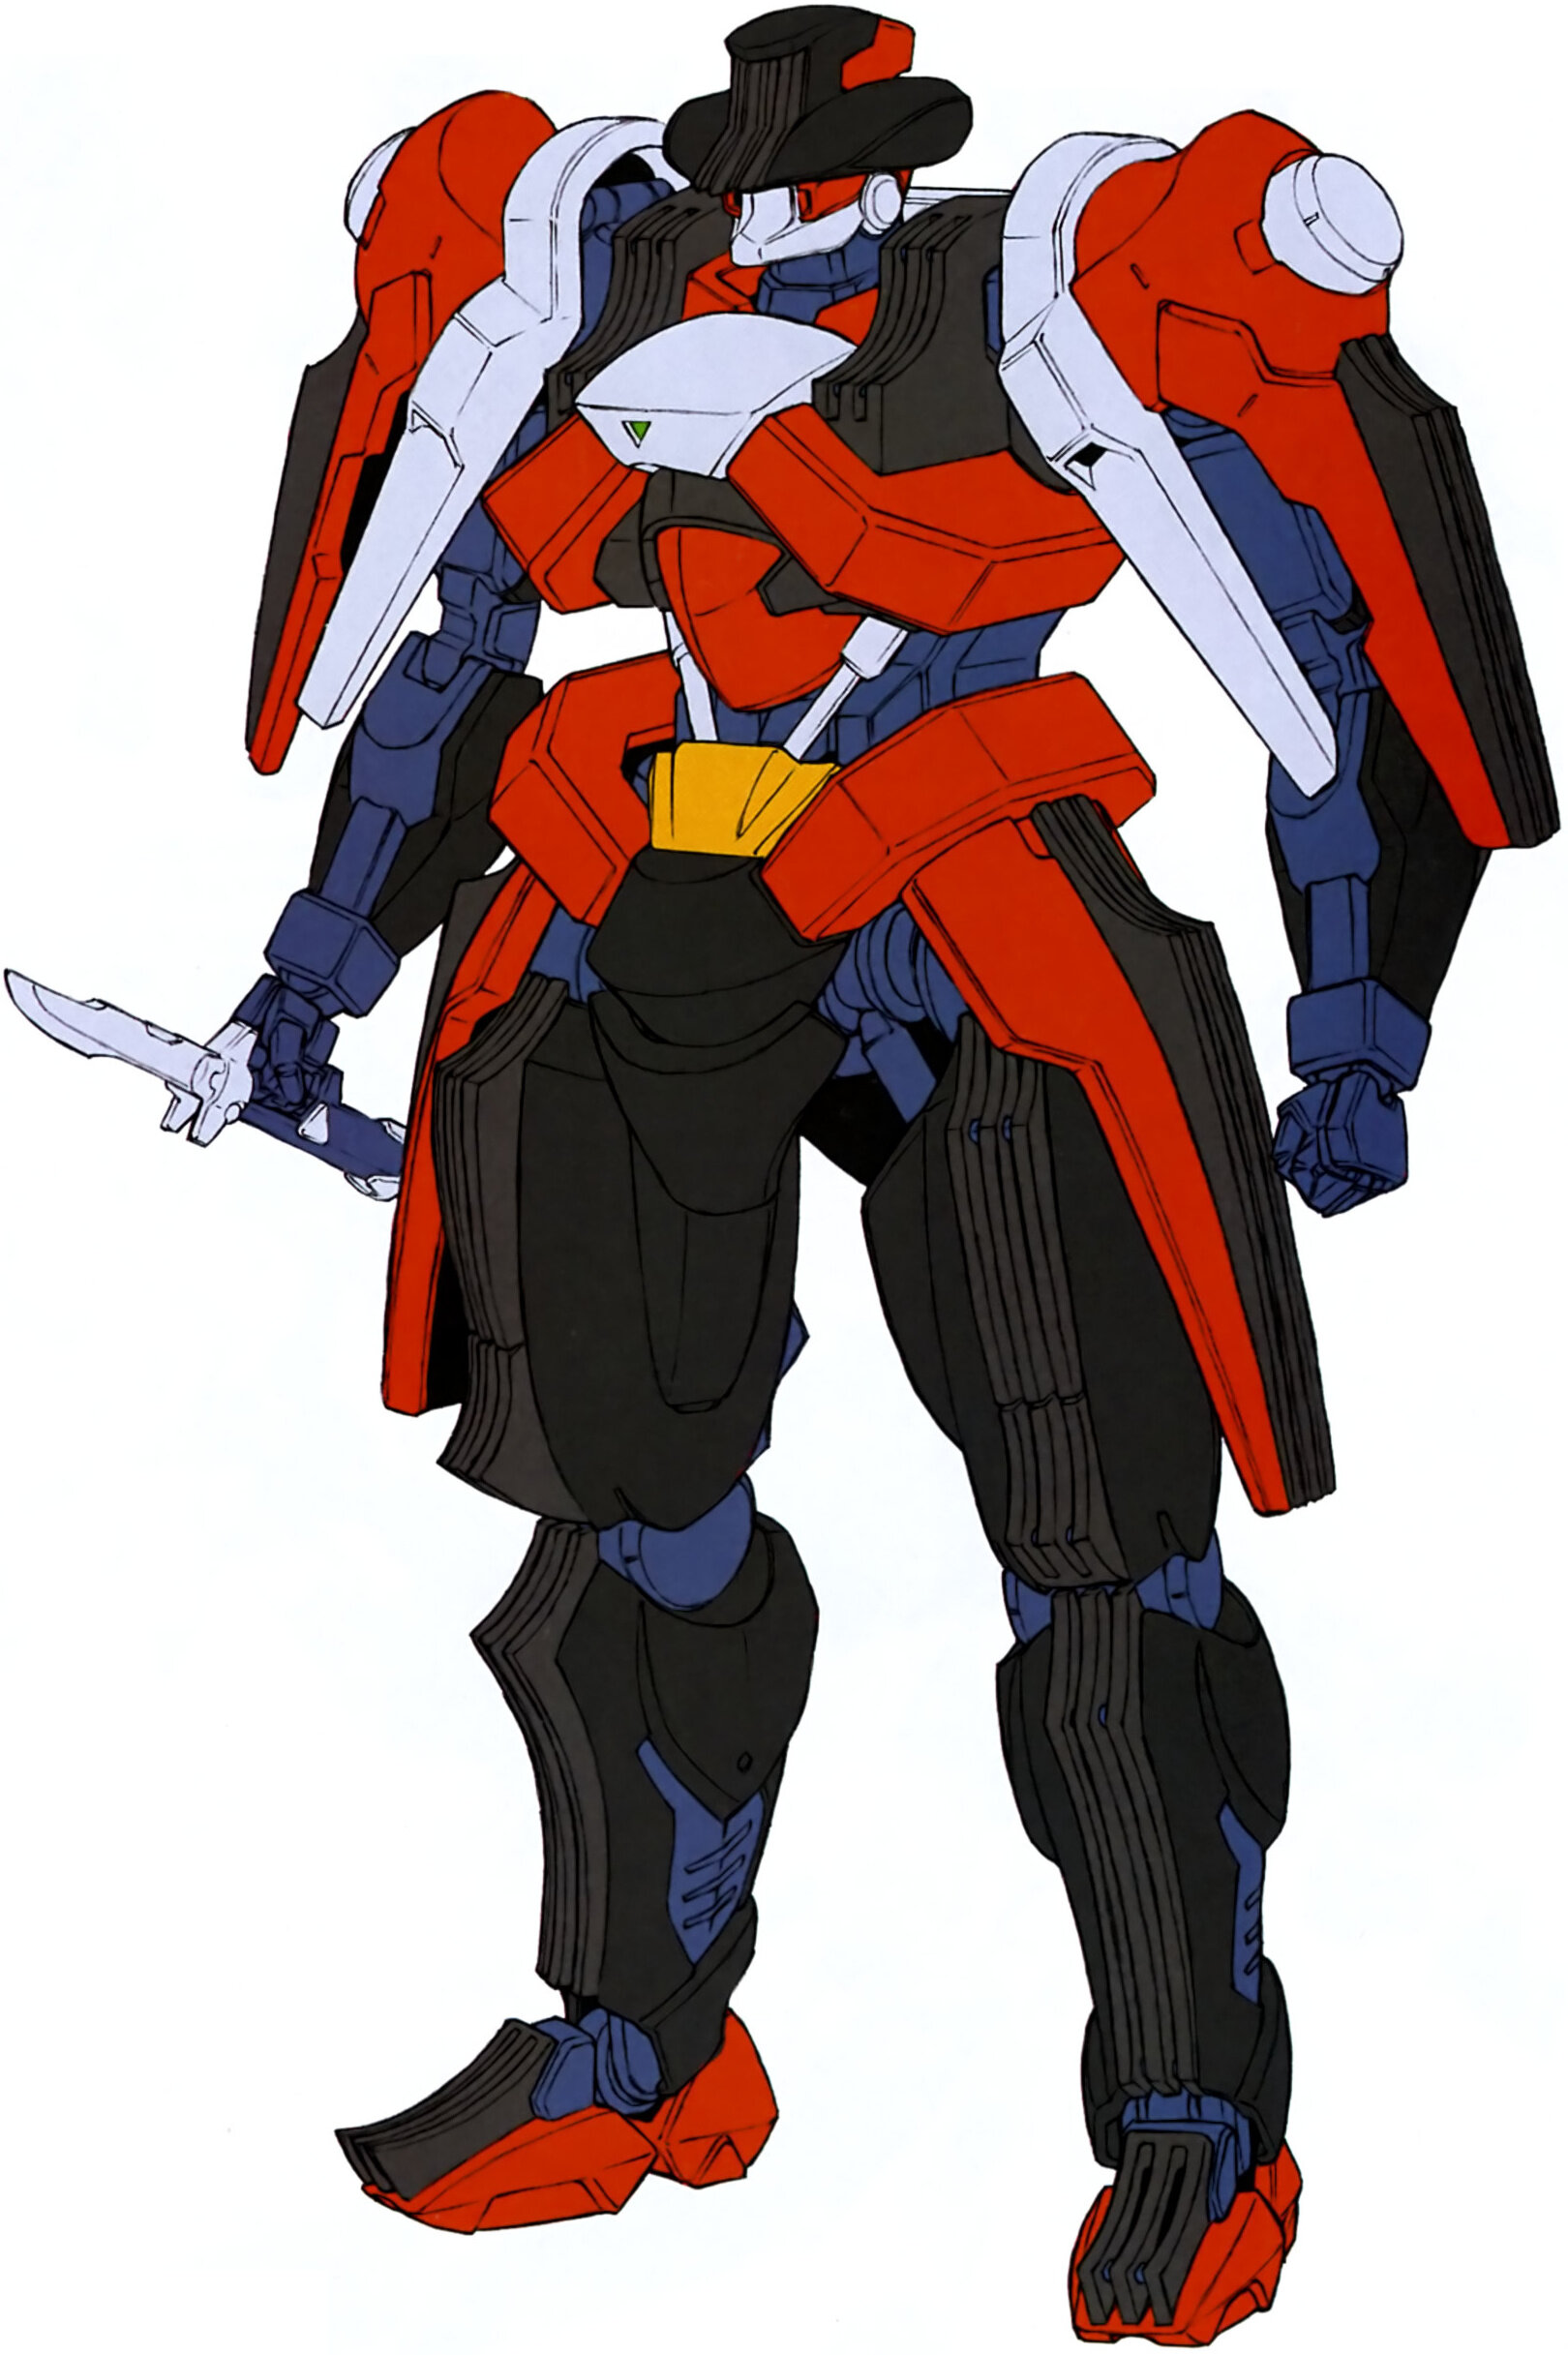 Interesting Gundam Ms And Mecha Designs And Your Thoughts On Them Off Topic The Ttv Message Boards